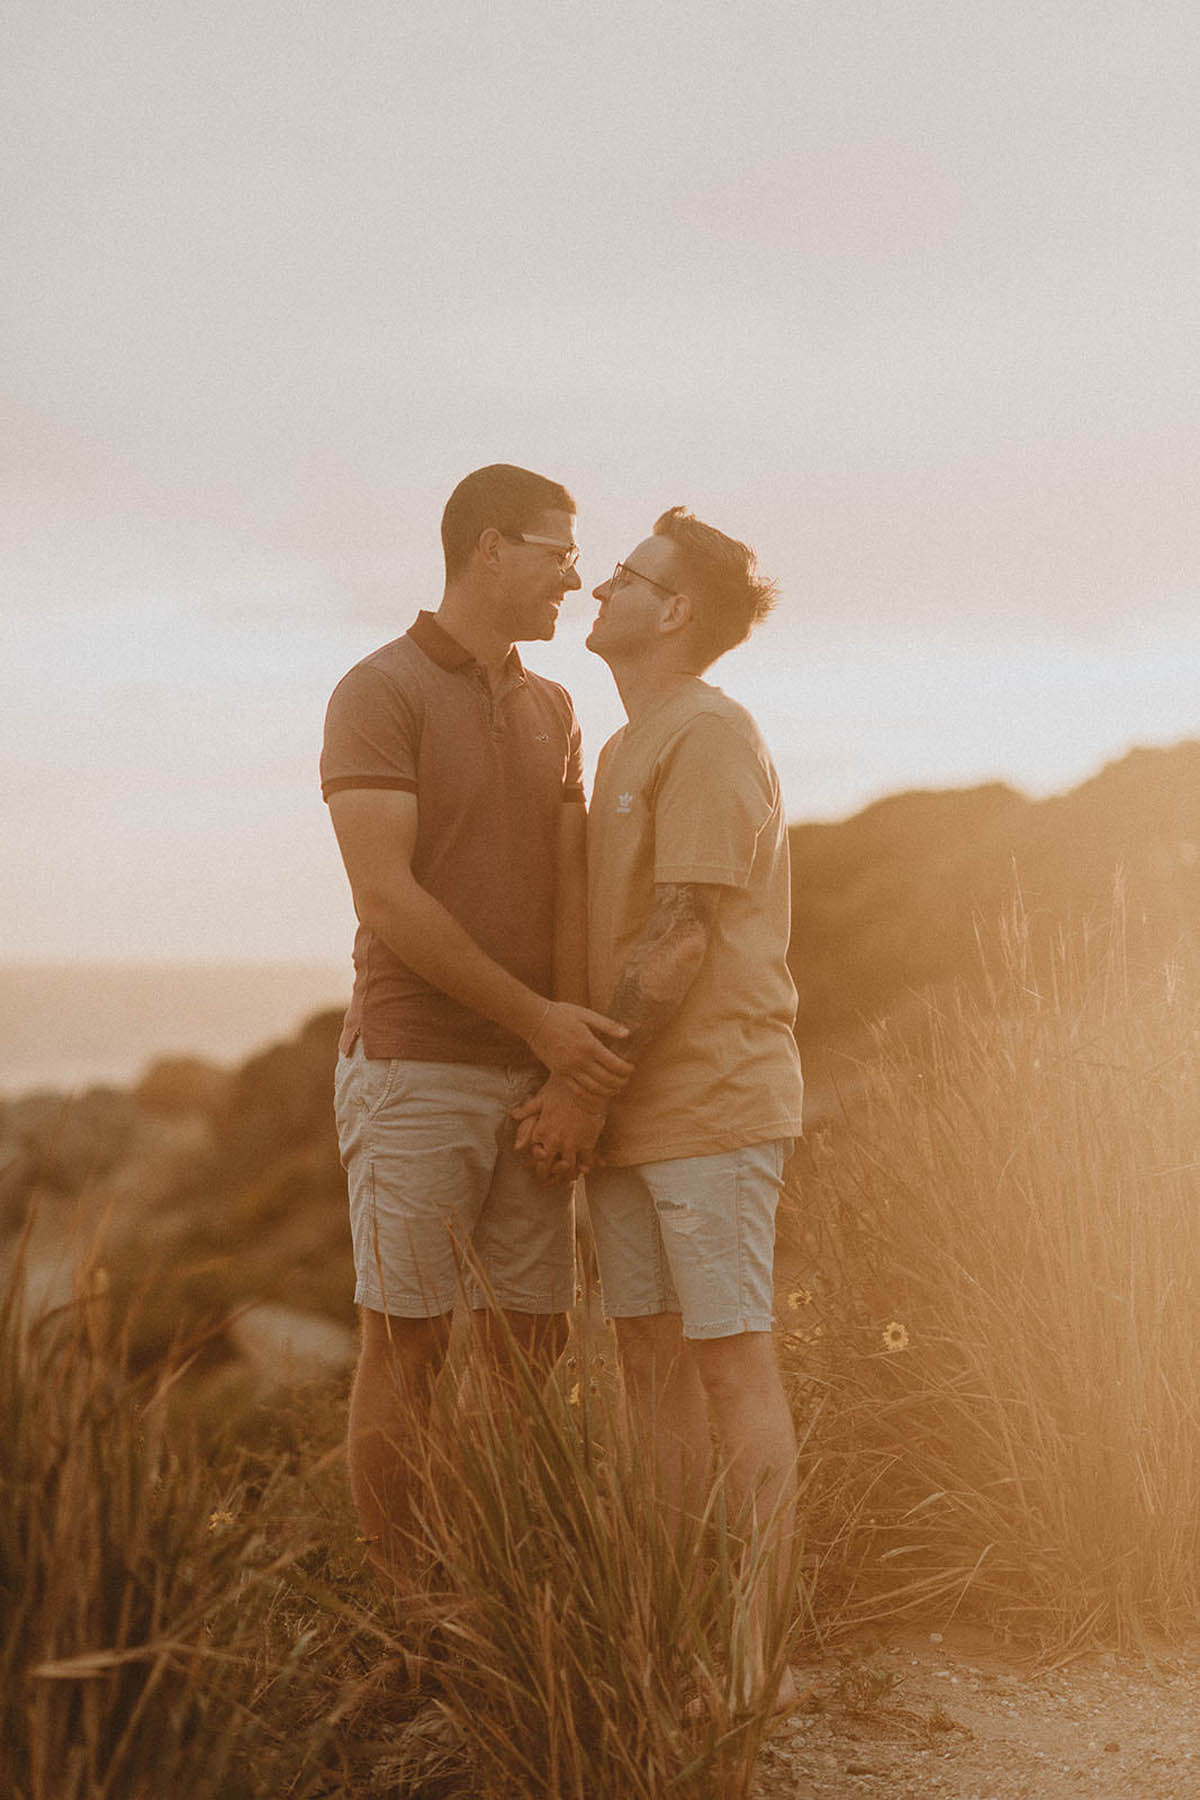 Two men stand, gazing at each other, against a backdrop of golden hour sun.